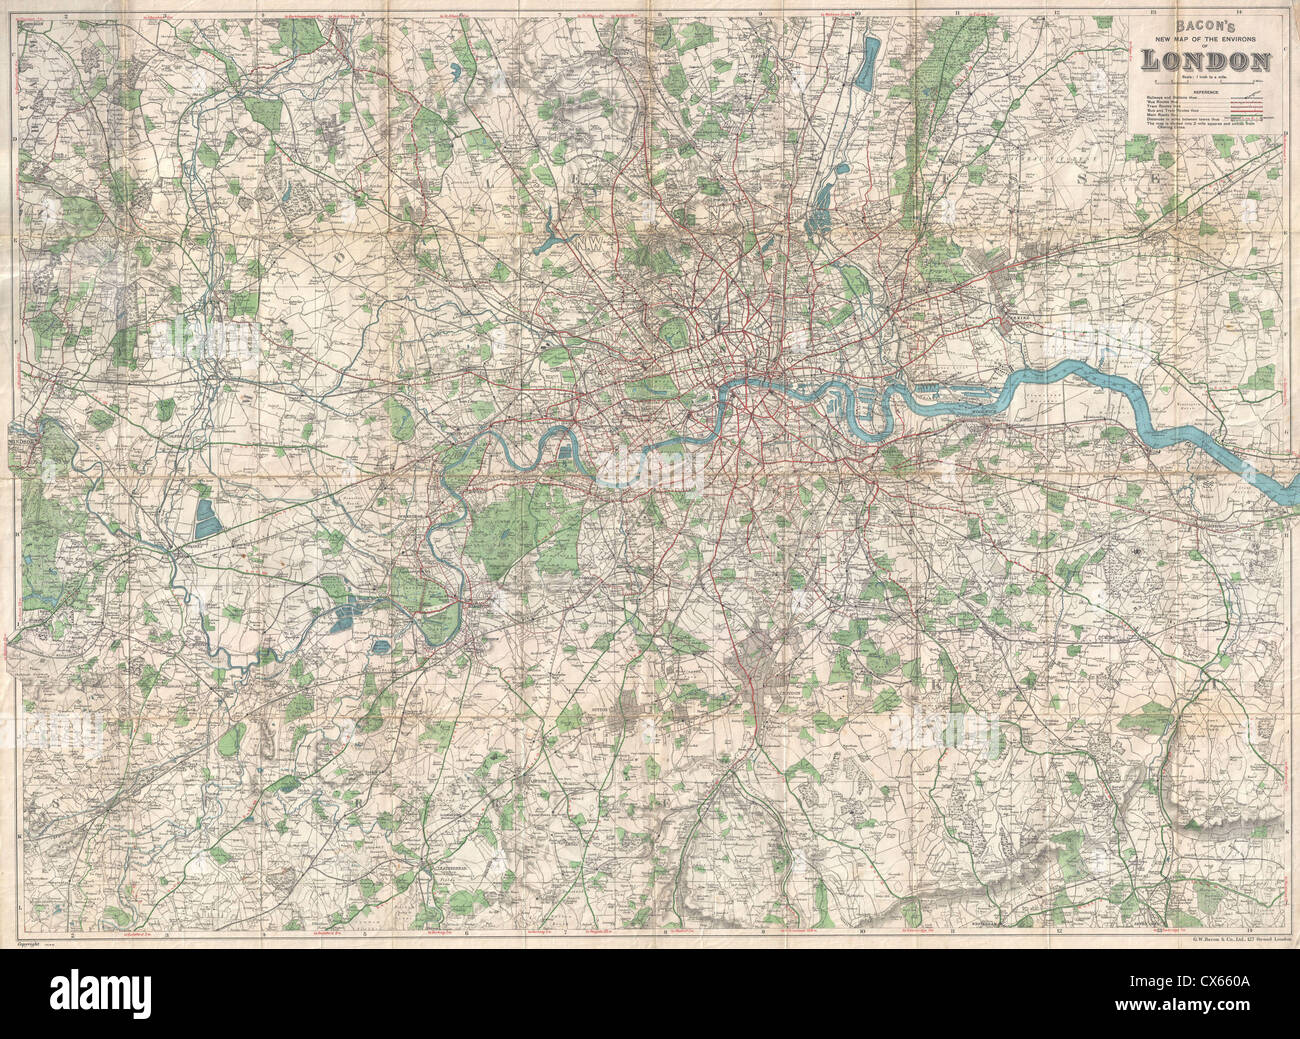 1920 Bacon Pocket Map of London, England and Environs Stock Photo